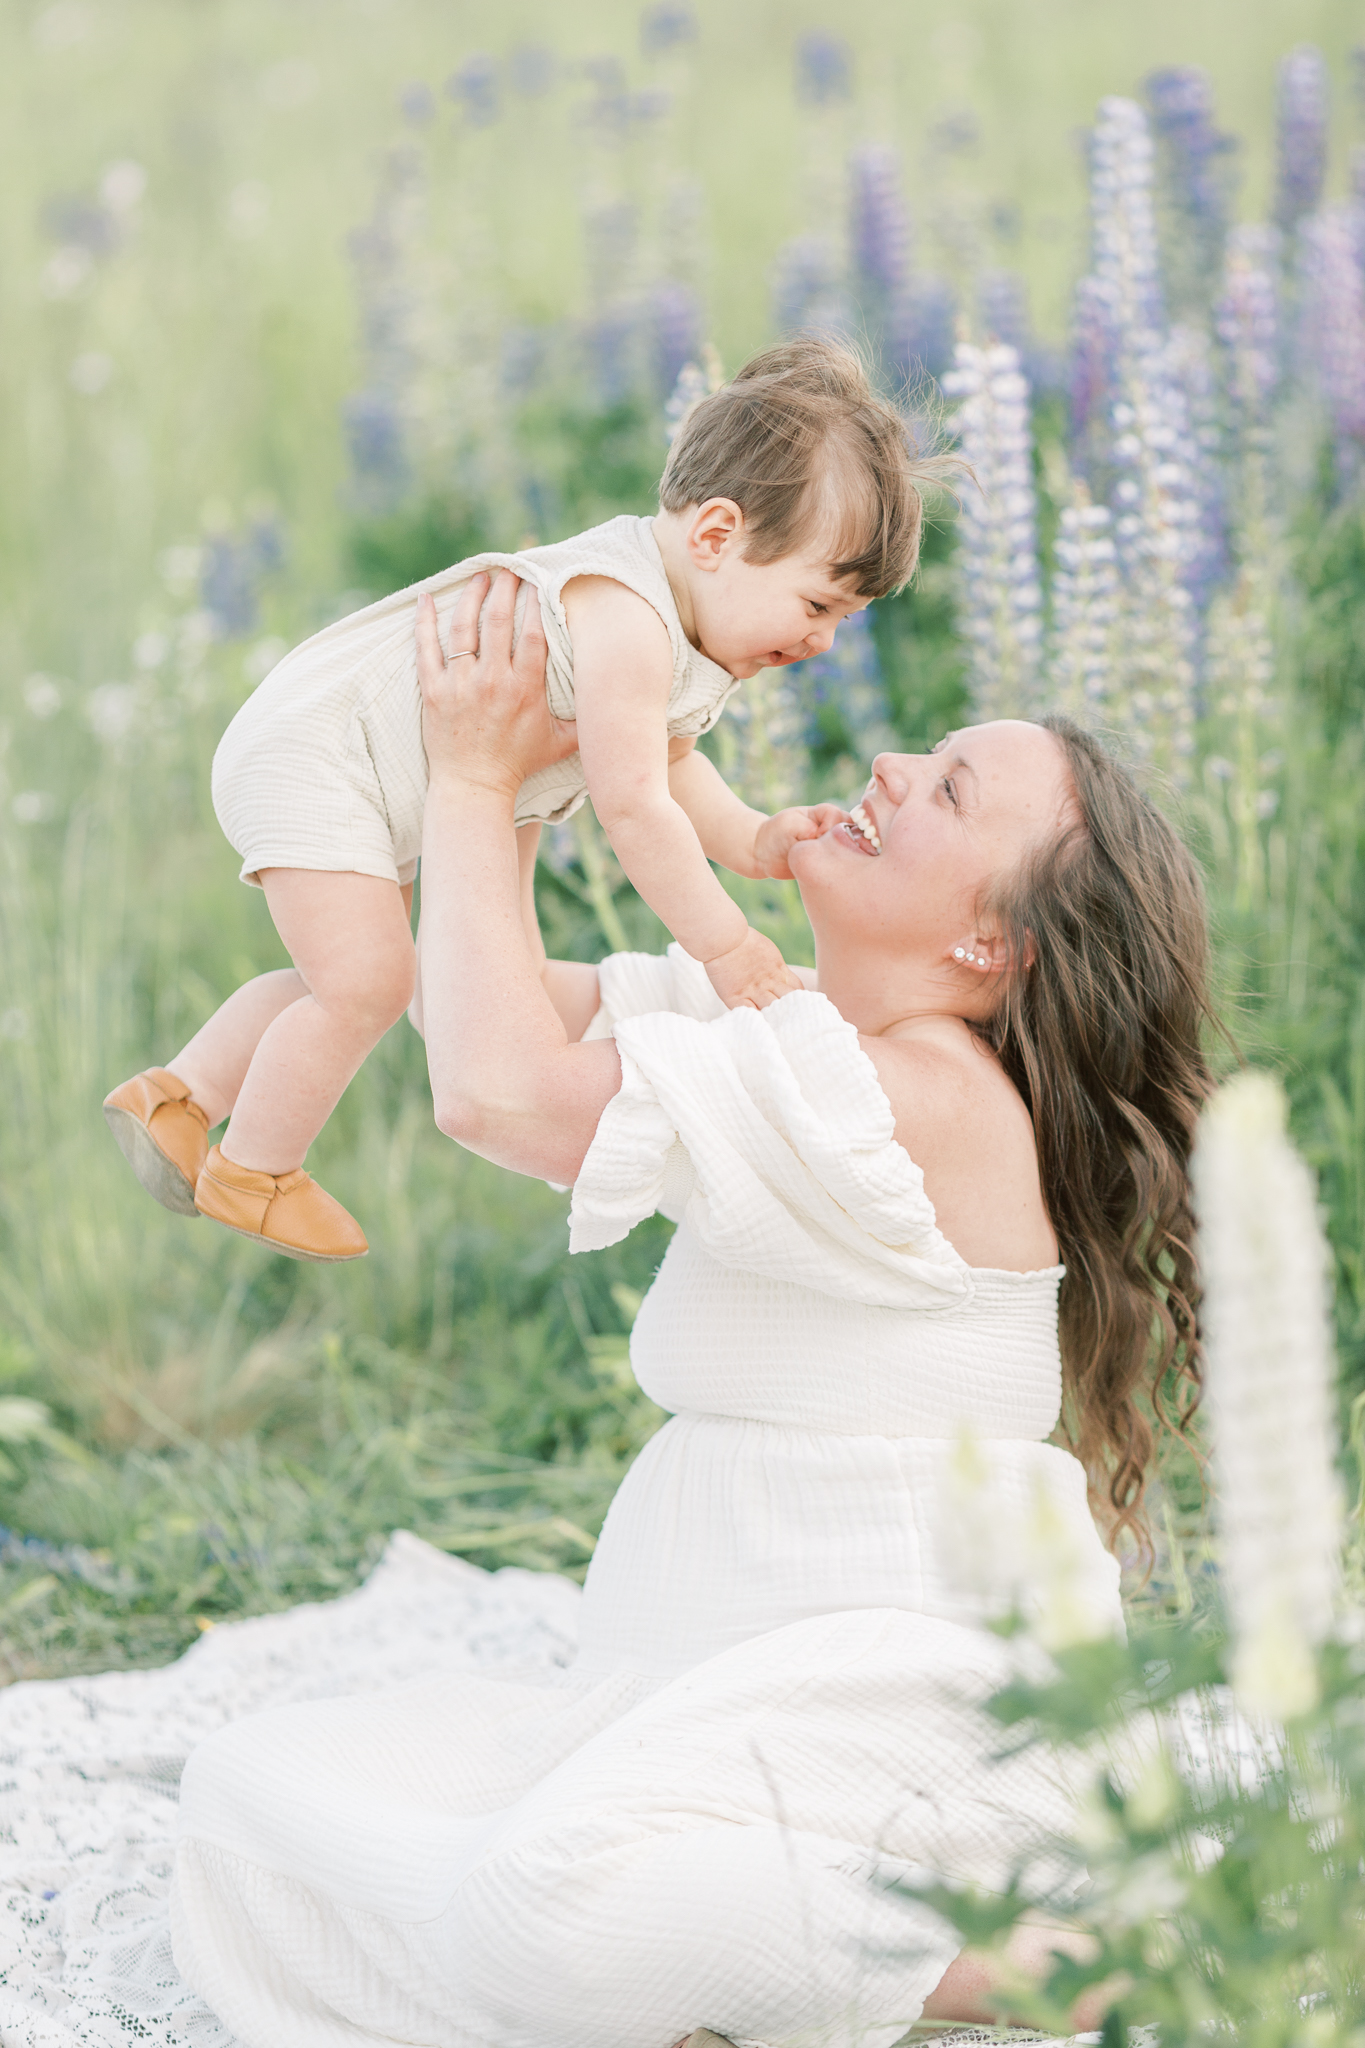 mom and baby in a wildflower field for a motherhood photo session in the PNW.